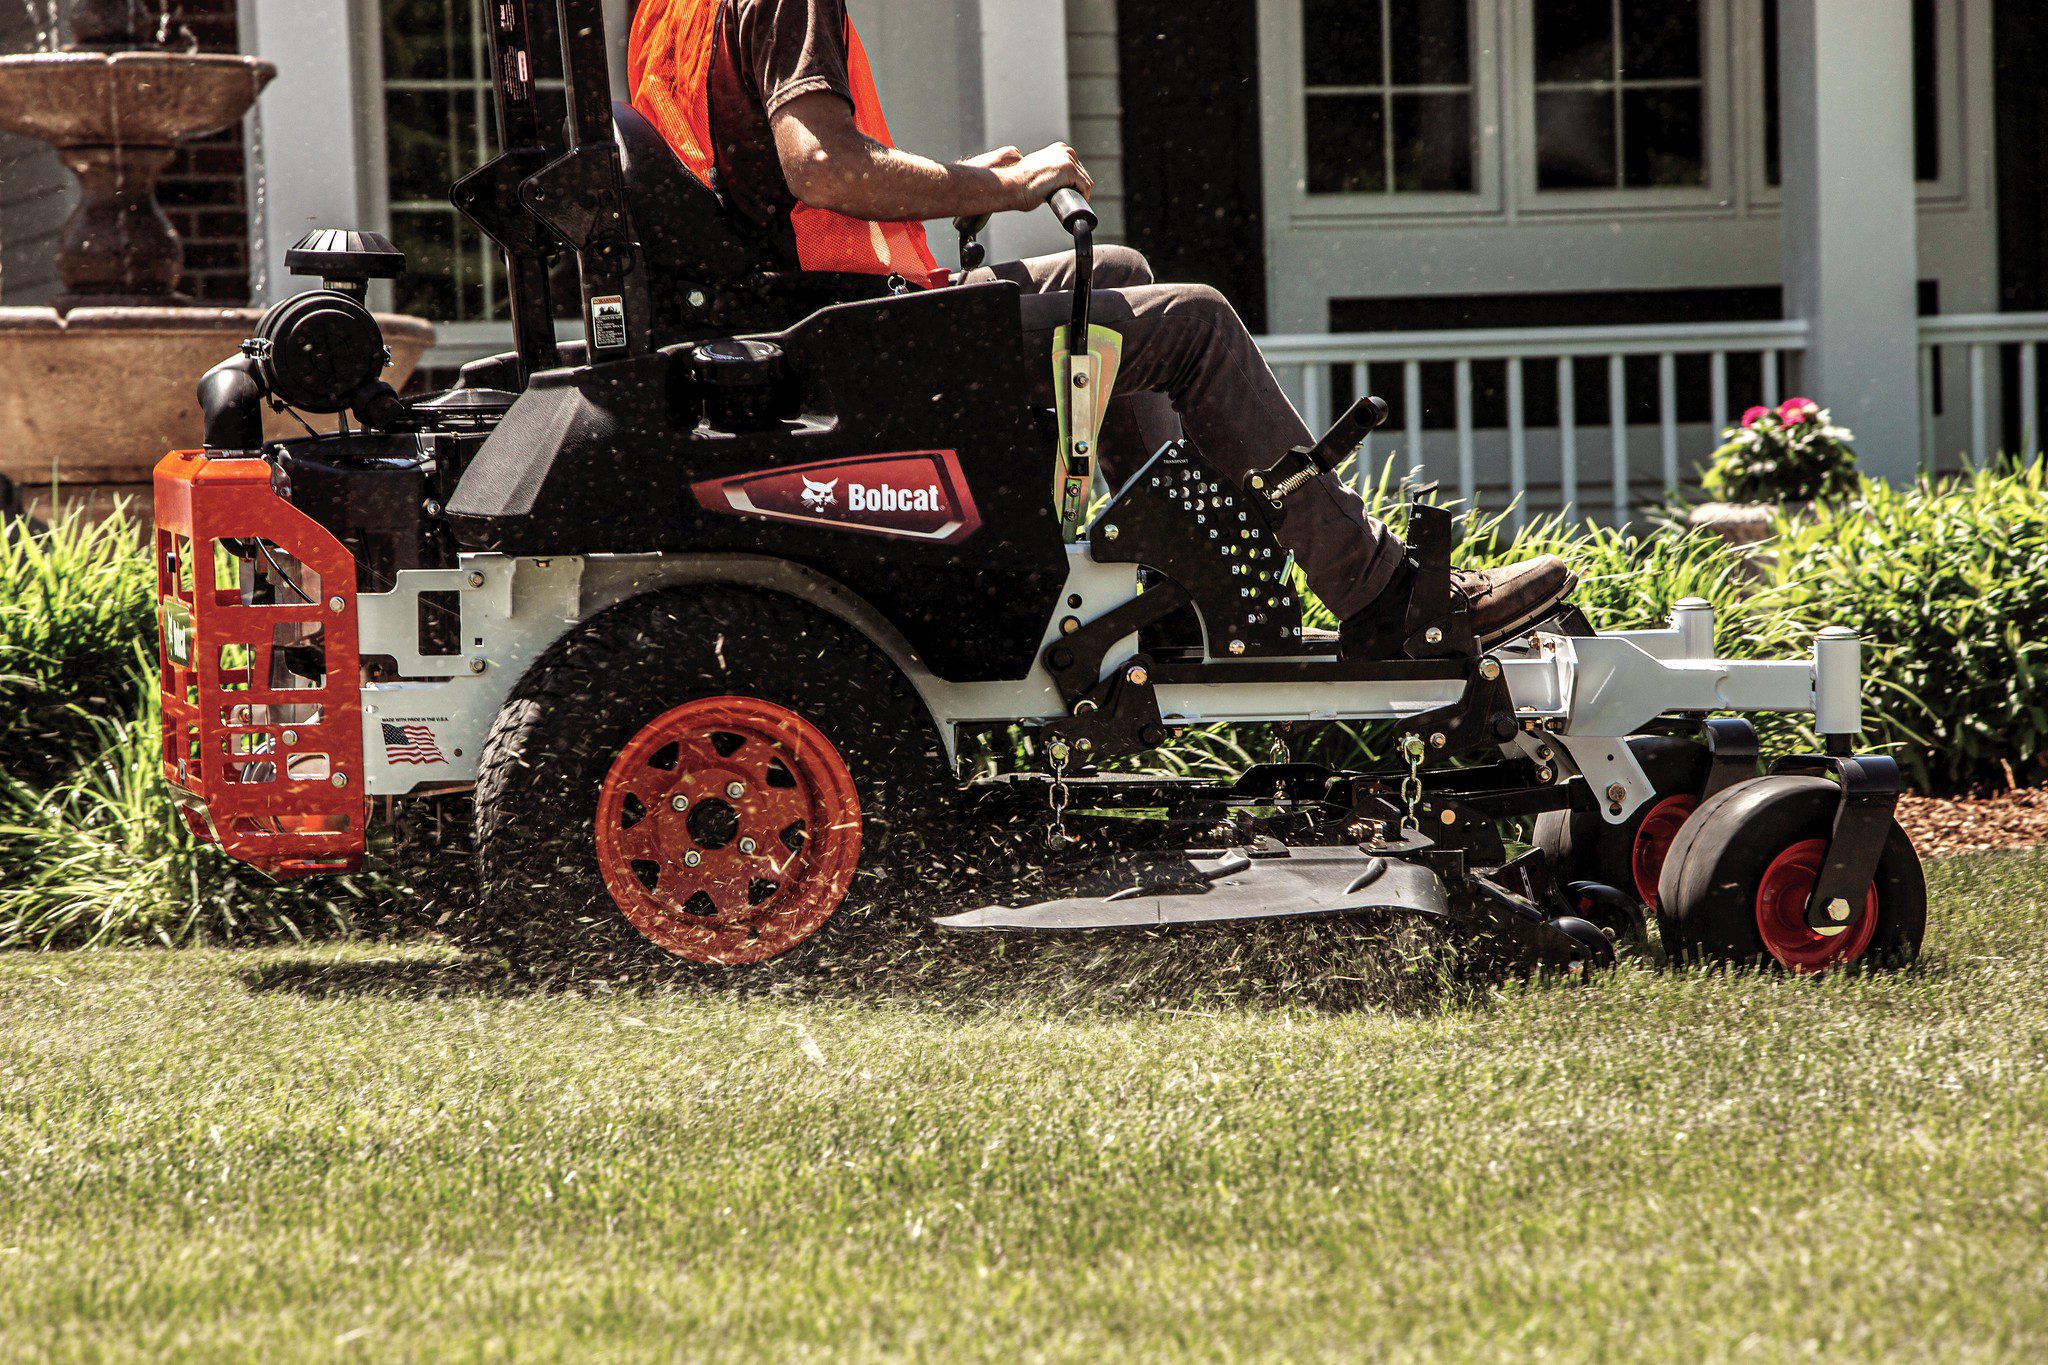 Browse Specs and more for the Bobcat ZT6000 Zero-Turn Mower 61″ - Bobcat of Indy